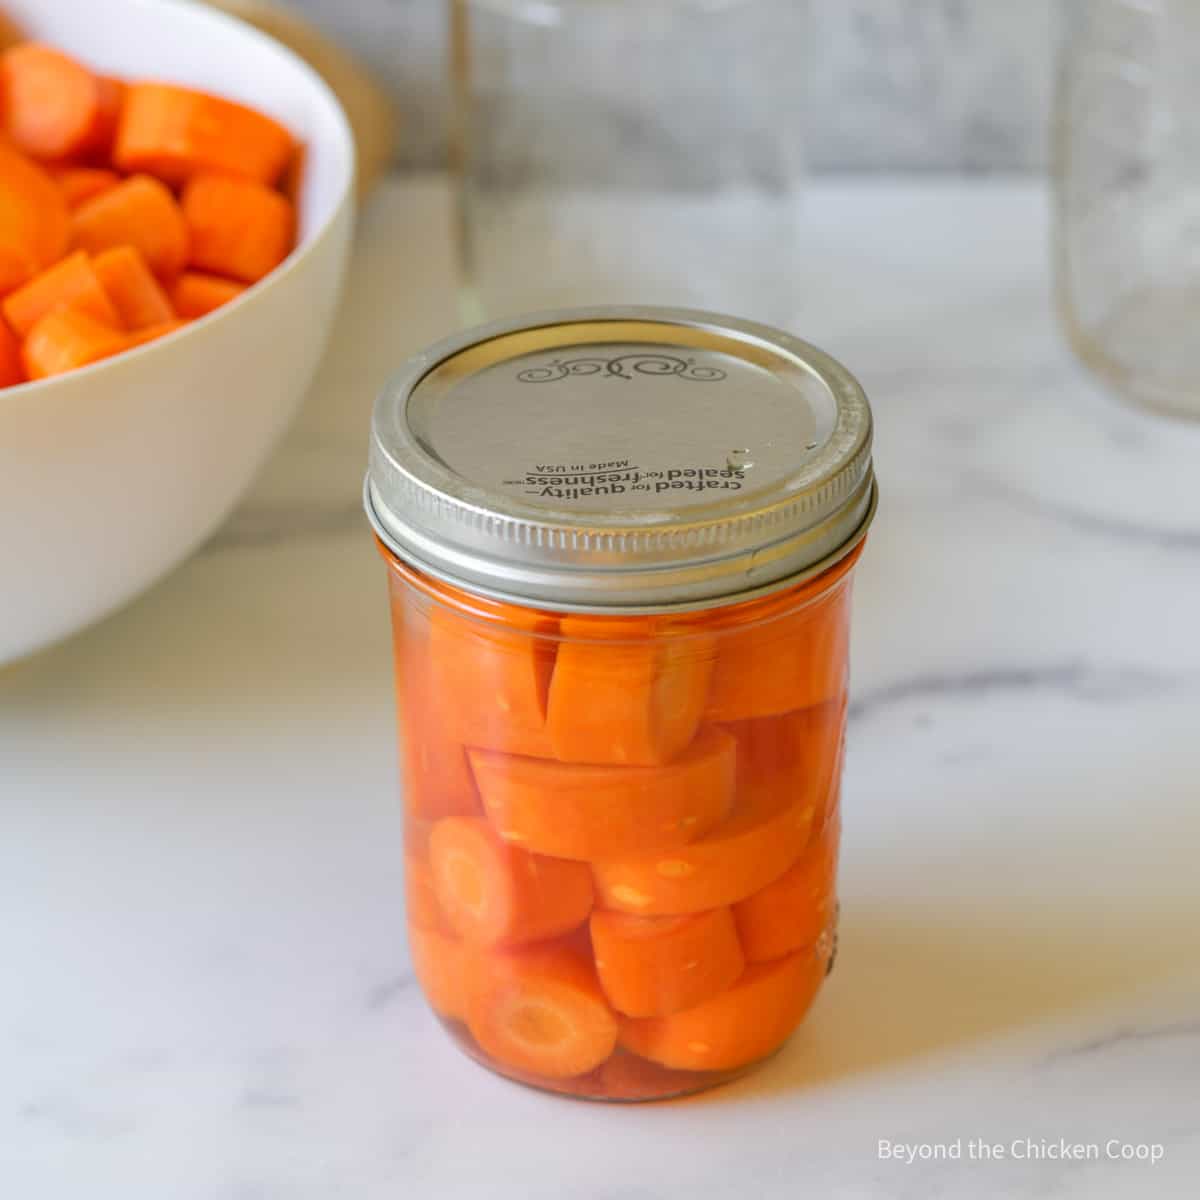 A canning jar filled with carrots.